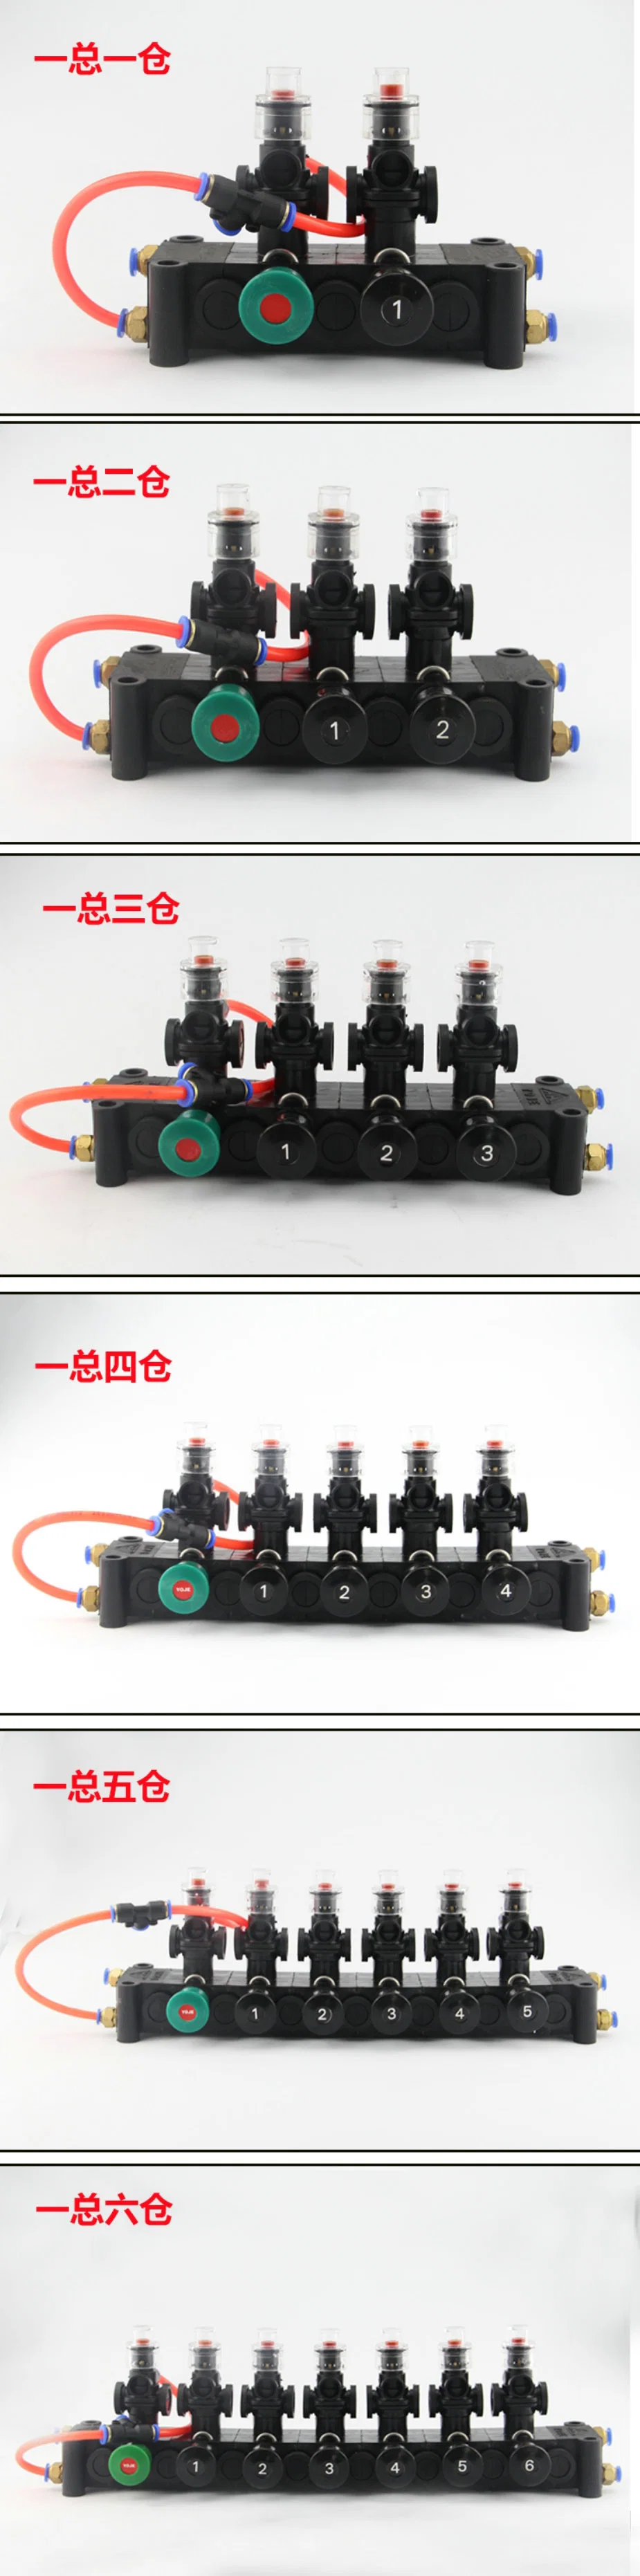 Pneumatic Control Block Plastic (Pneumatic Switch Controller) for 5 Compartments Oil Tanker Truck